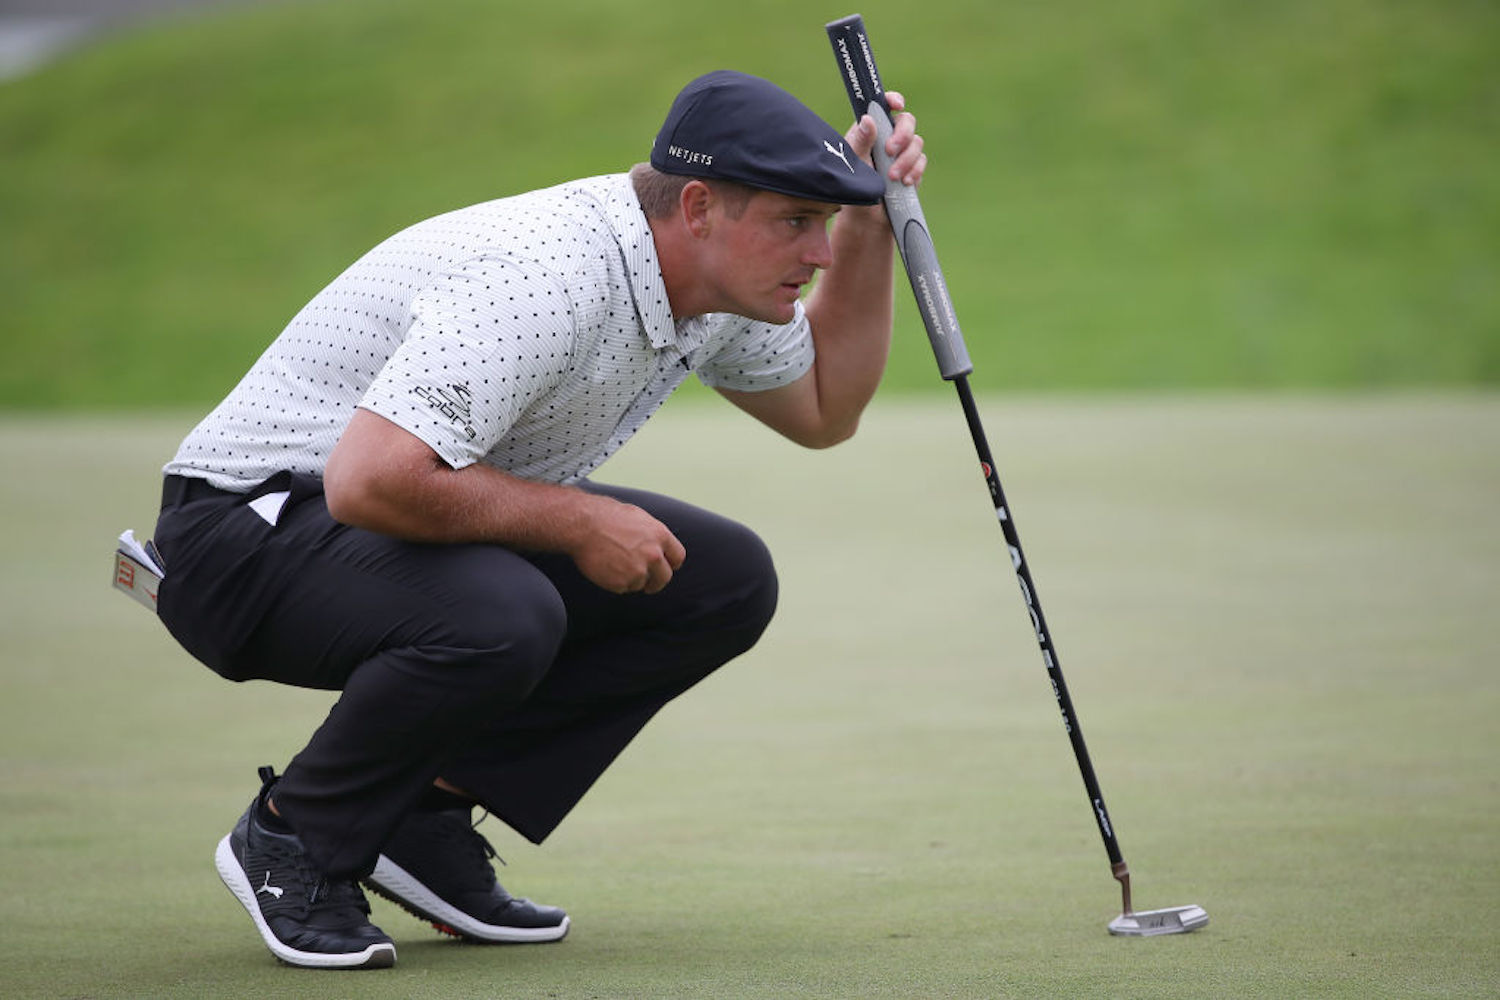 Bryson DeChambeau has become the talk of the golf world for his mammoth drives, but he just made history with a different club.